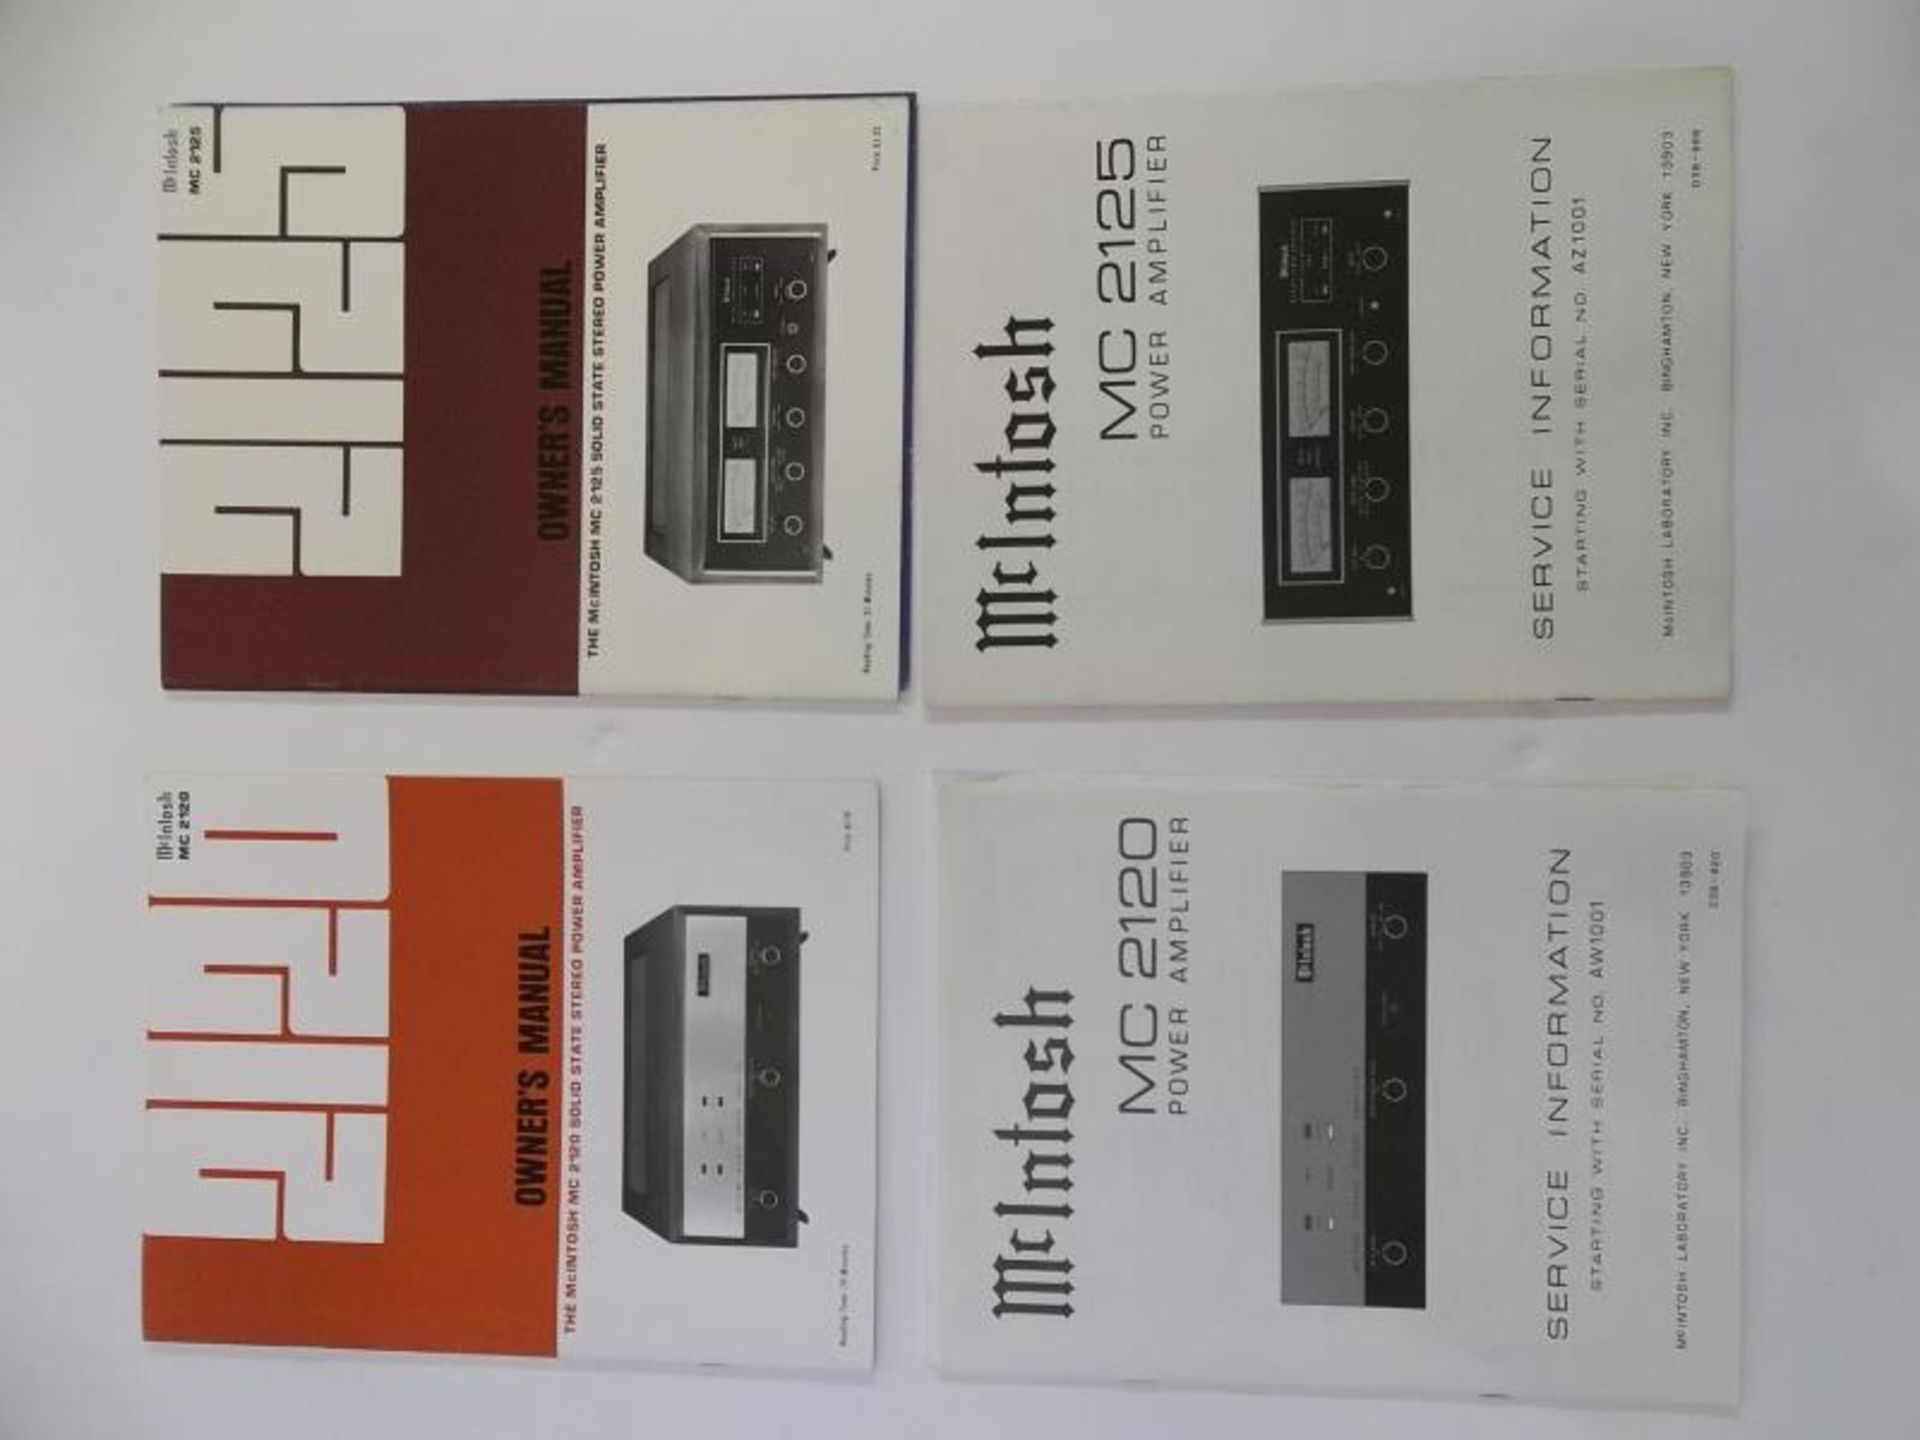 Lot of 8 - McIntosh (2) owner's manual and service info for environmental equalizers for MQ101 and - Image 4 of 5